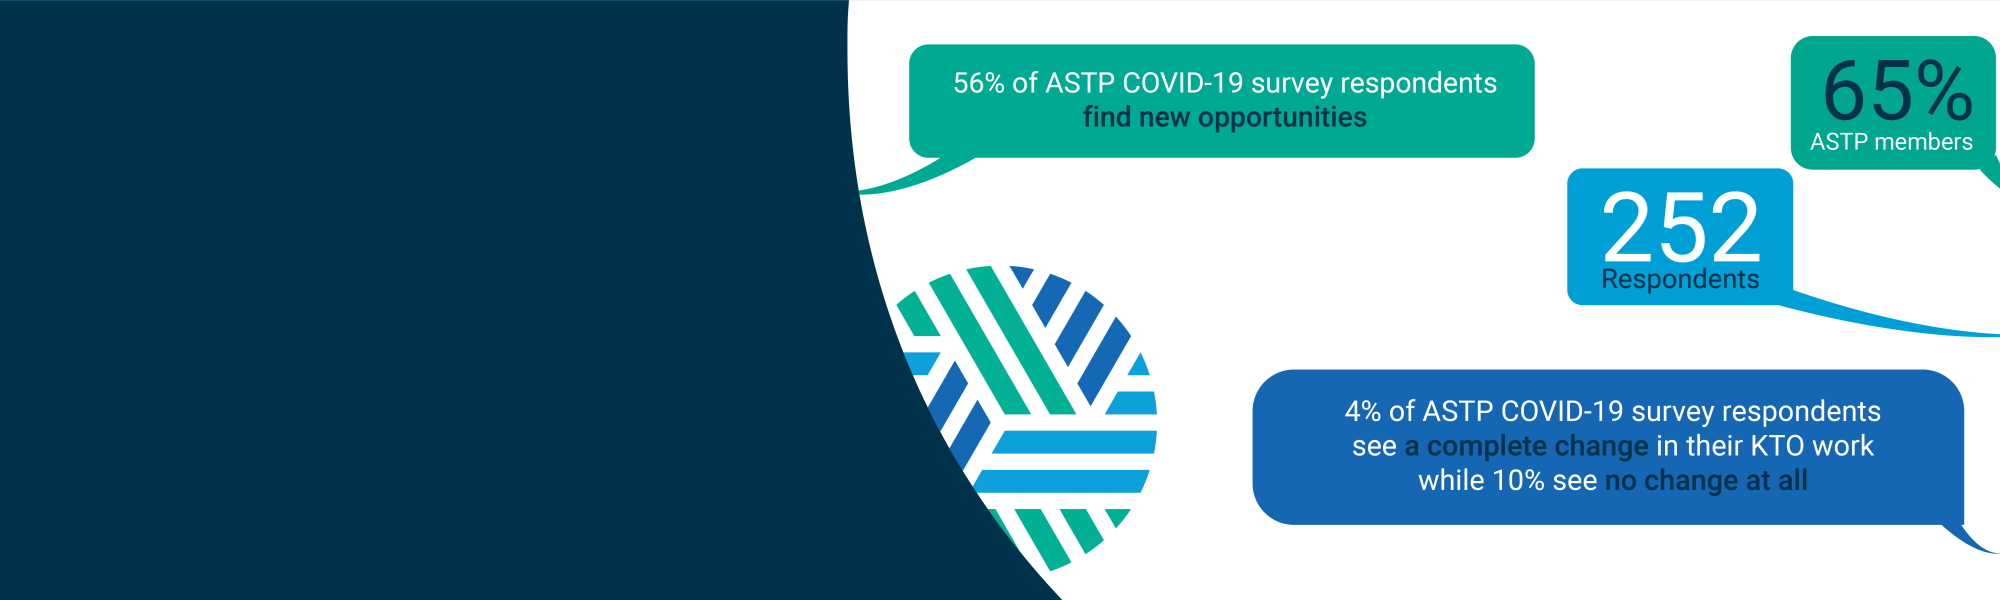 ASTP - 56% of ASTP COVID-19 survey respondents find new opportunities in 2020